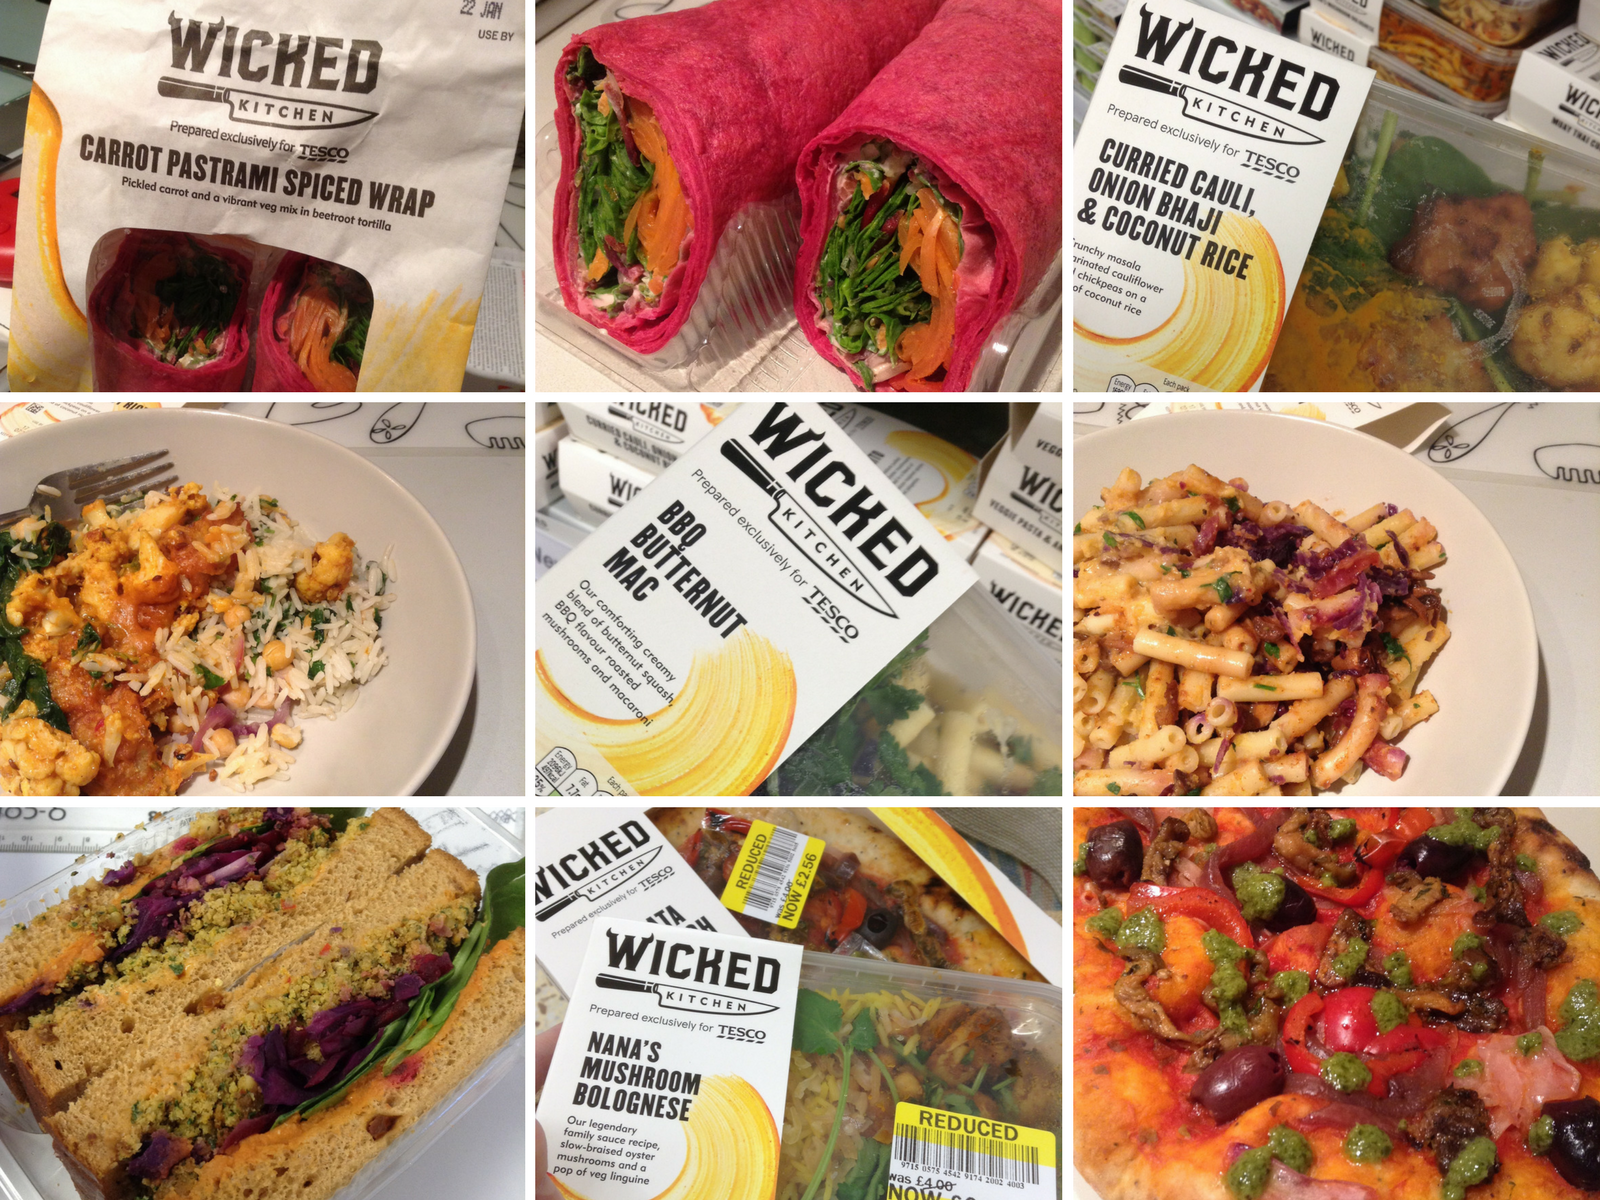 Wicked Kitchen for Tesco, Vegan,Ready Meals, Pizza, Lunch to Go